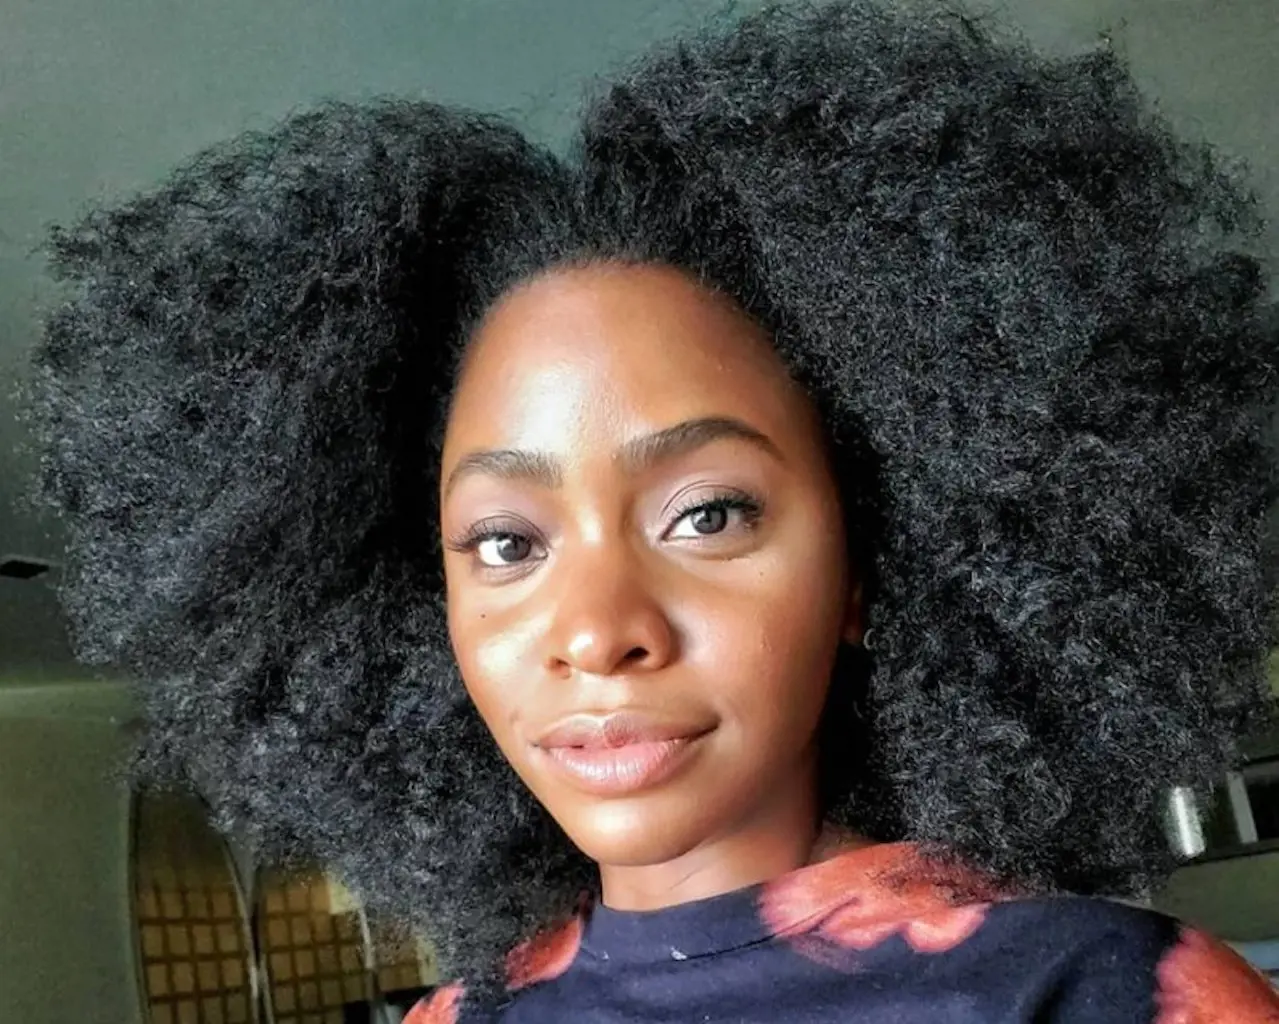 The actress shared her natural hair look to inspire others